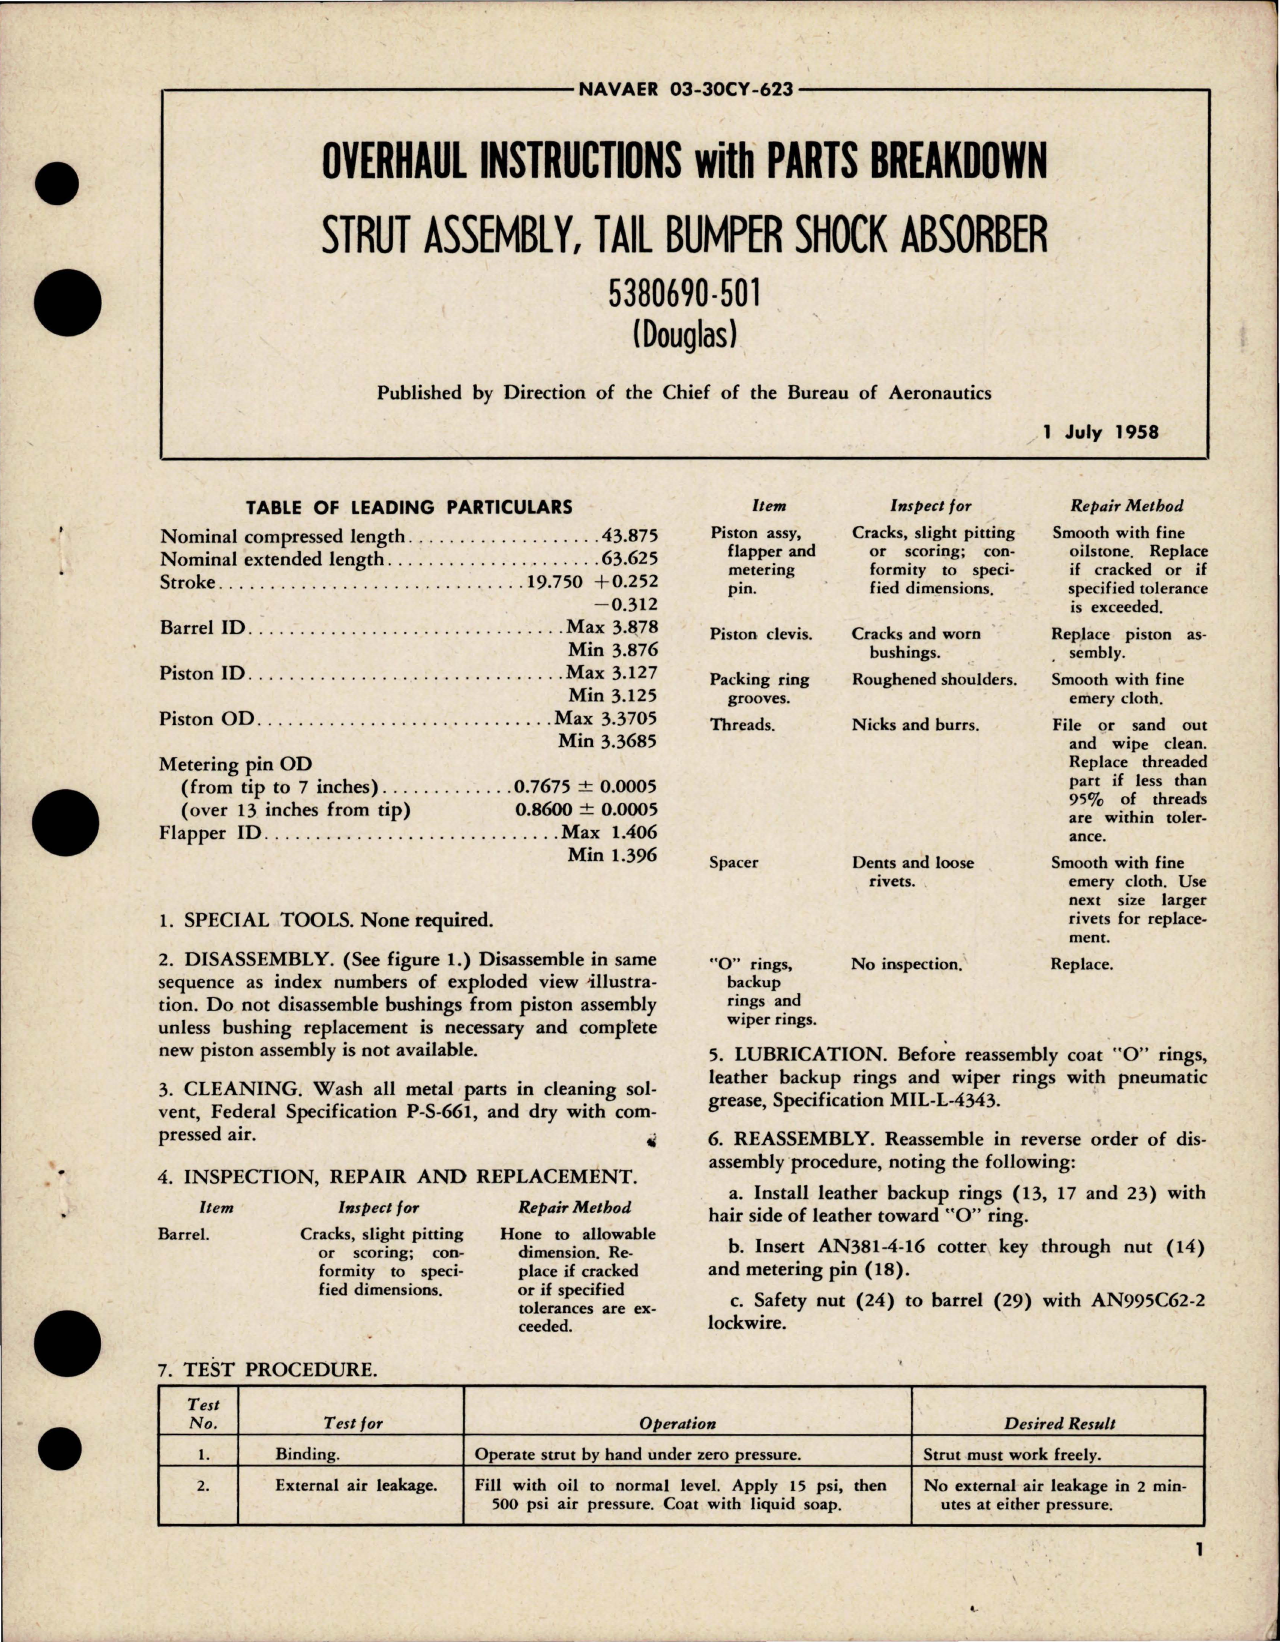 Sample page 1 from AirCorps Library document: Overhaul Instructions with Parts for Tail Bumper Shock Absorber Strut Assembly - 5380690-501